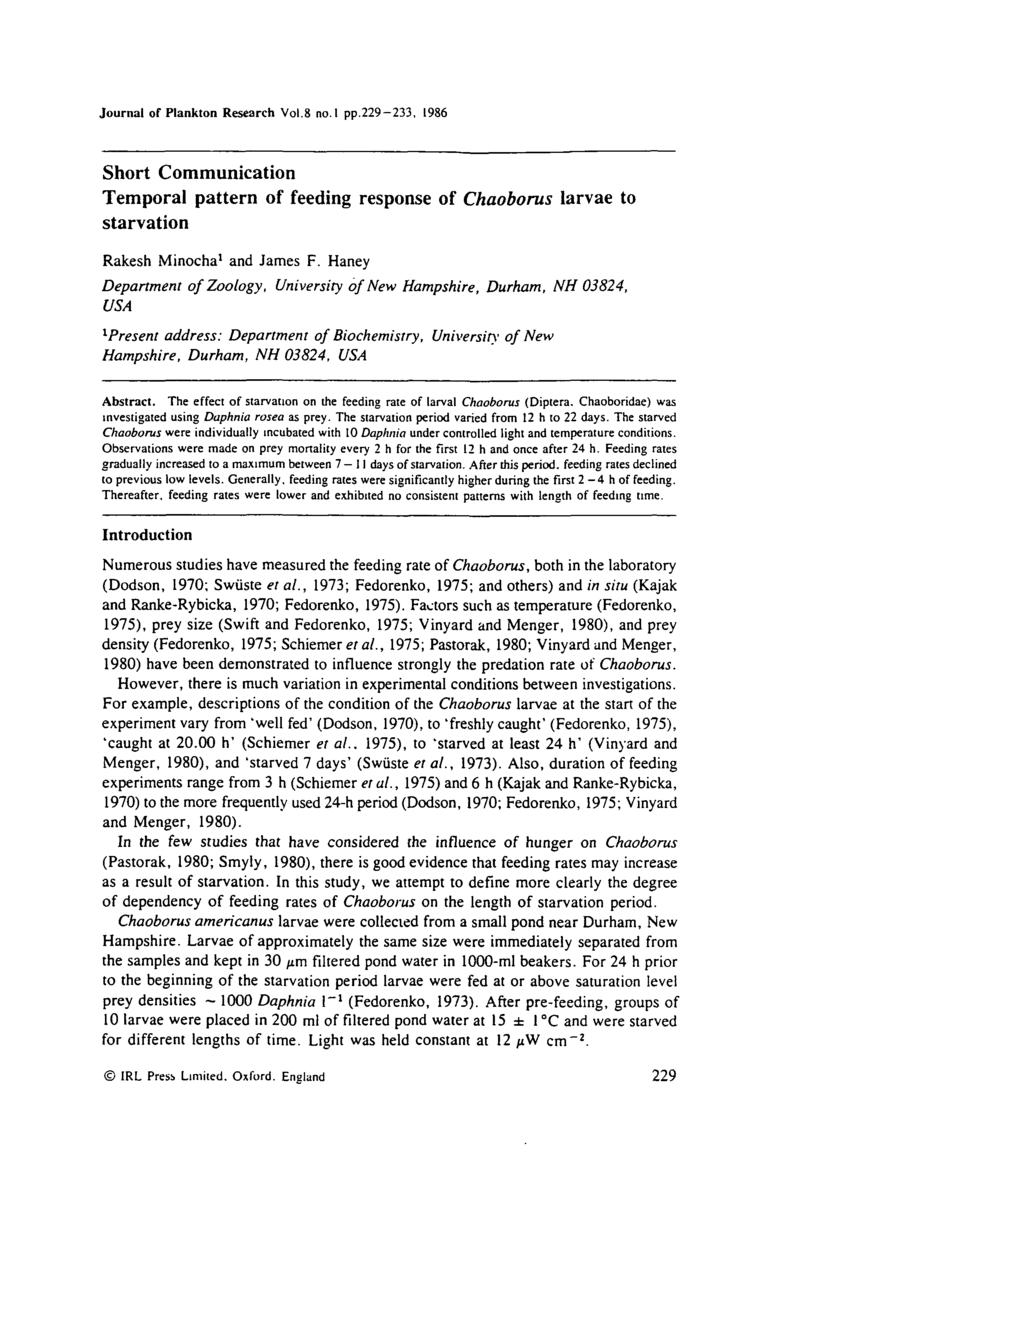 Journal of Plankton Research Vol.8 no.l pp.229-233, 1986 Short Communication Temporal pattern of feeding response of Chaobonis larvae to starvation Rakesh Minocha 1 and James F.